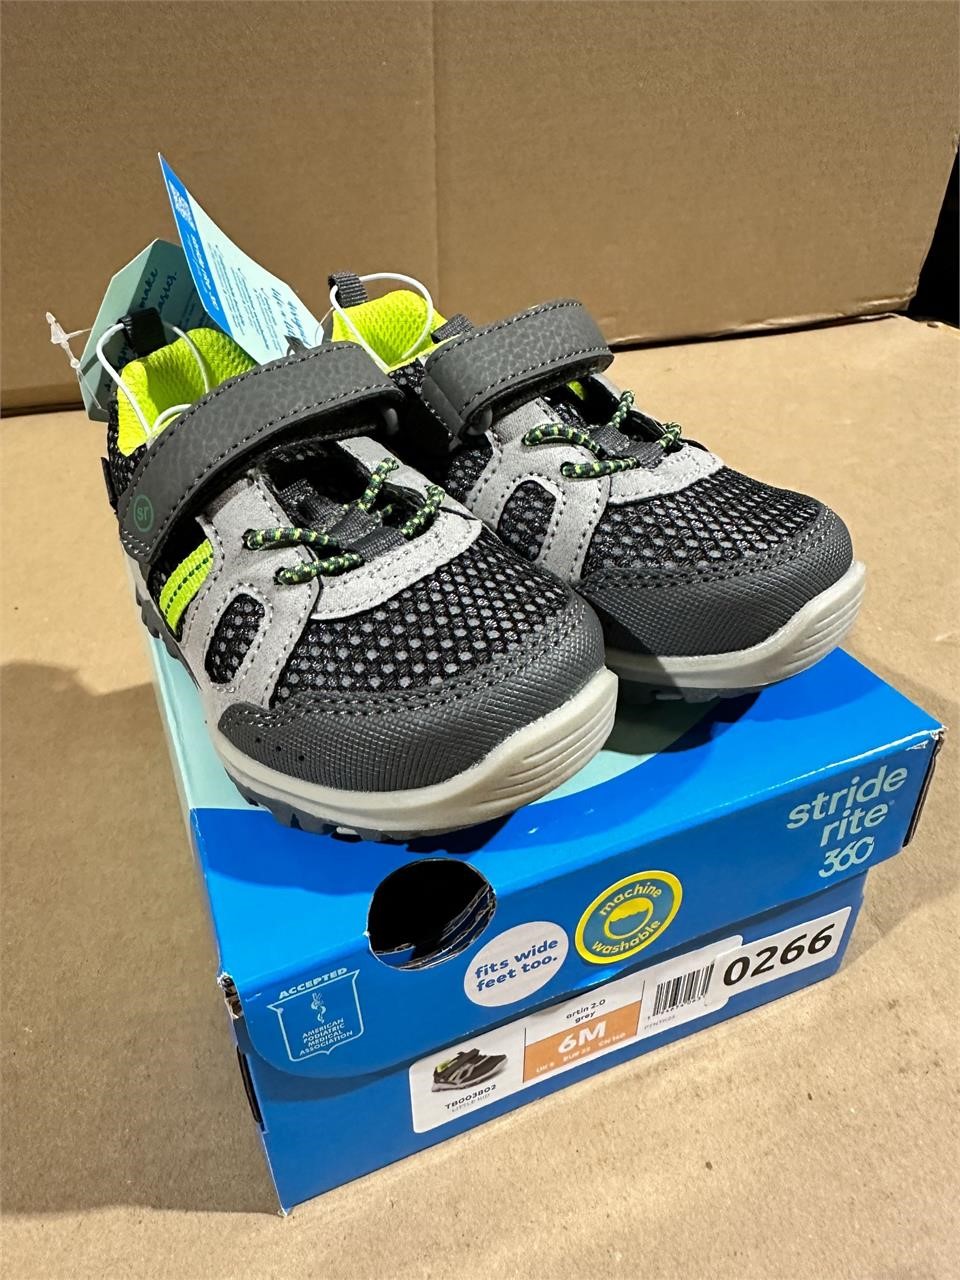 new Stride rite 360 kids 6m shoes